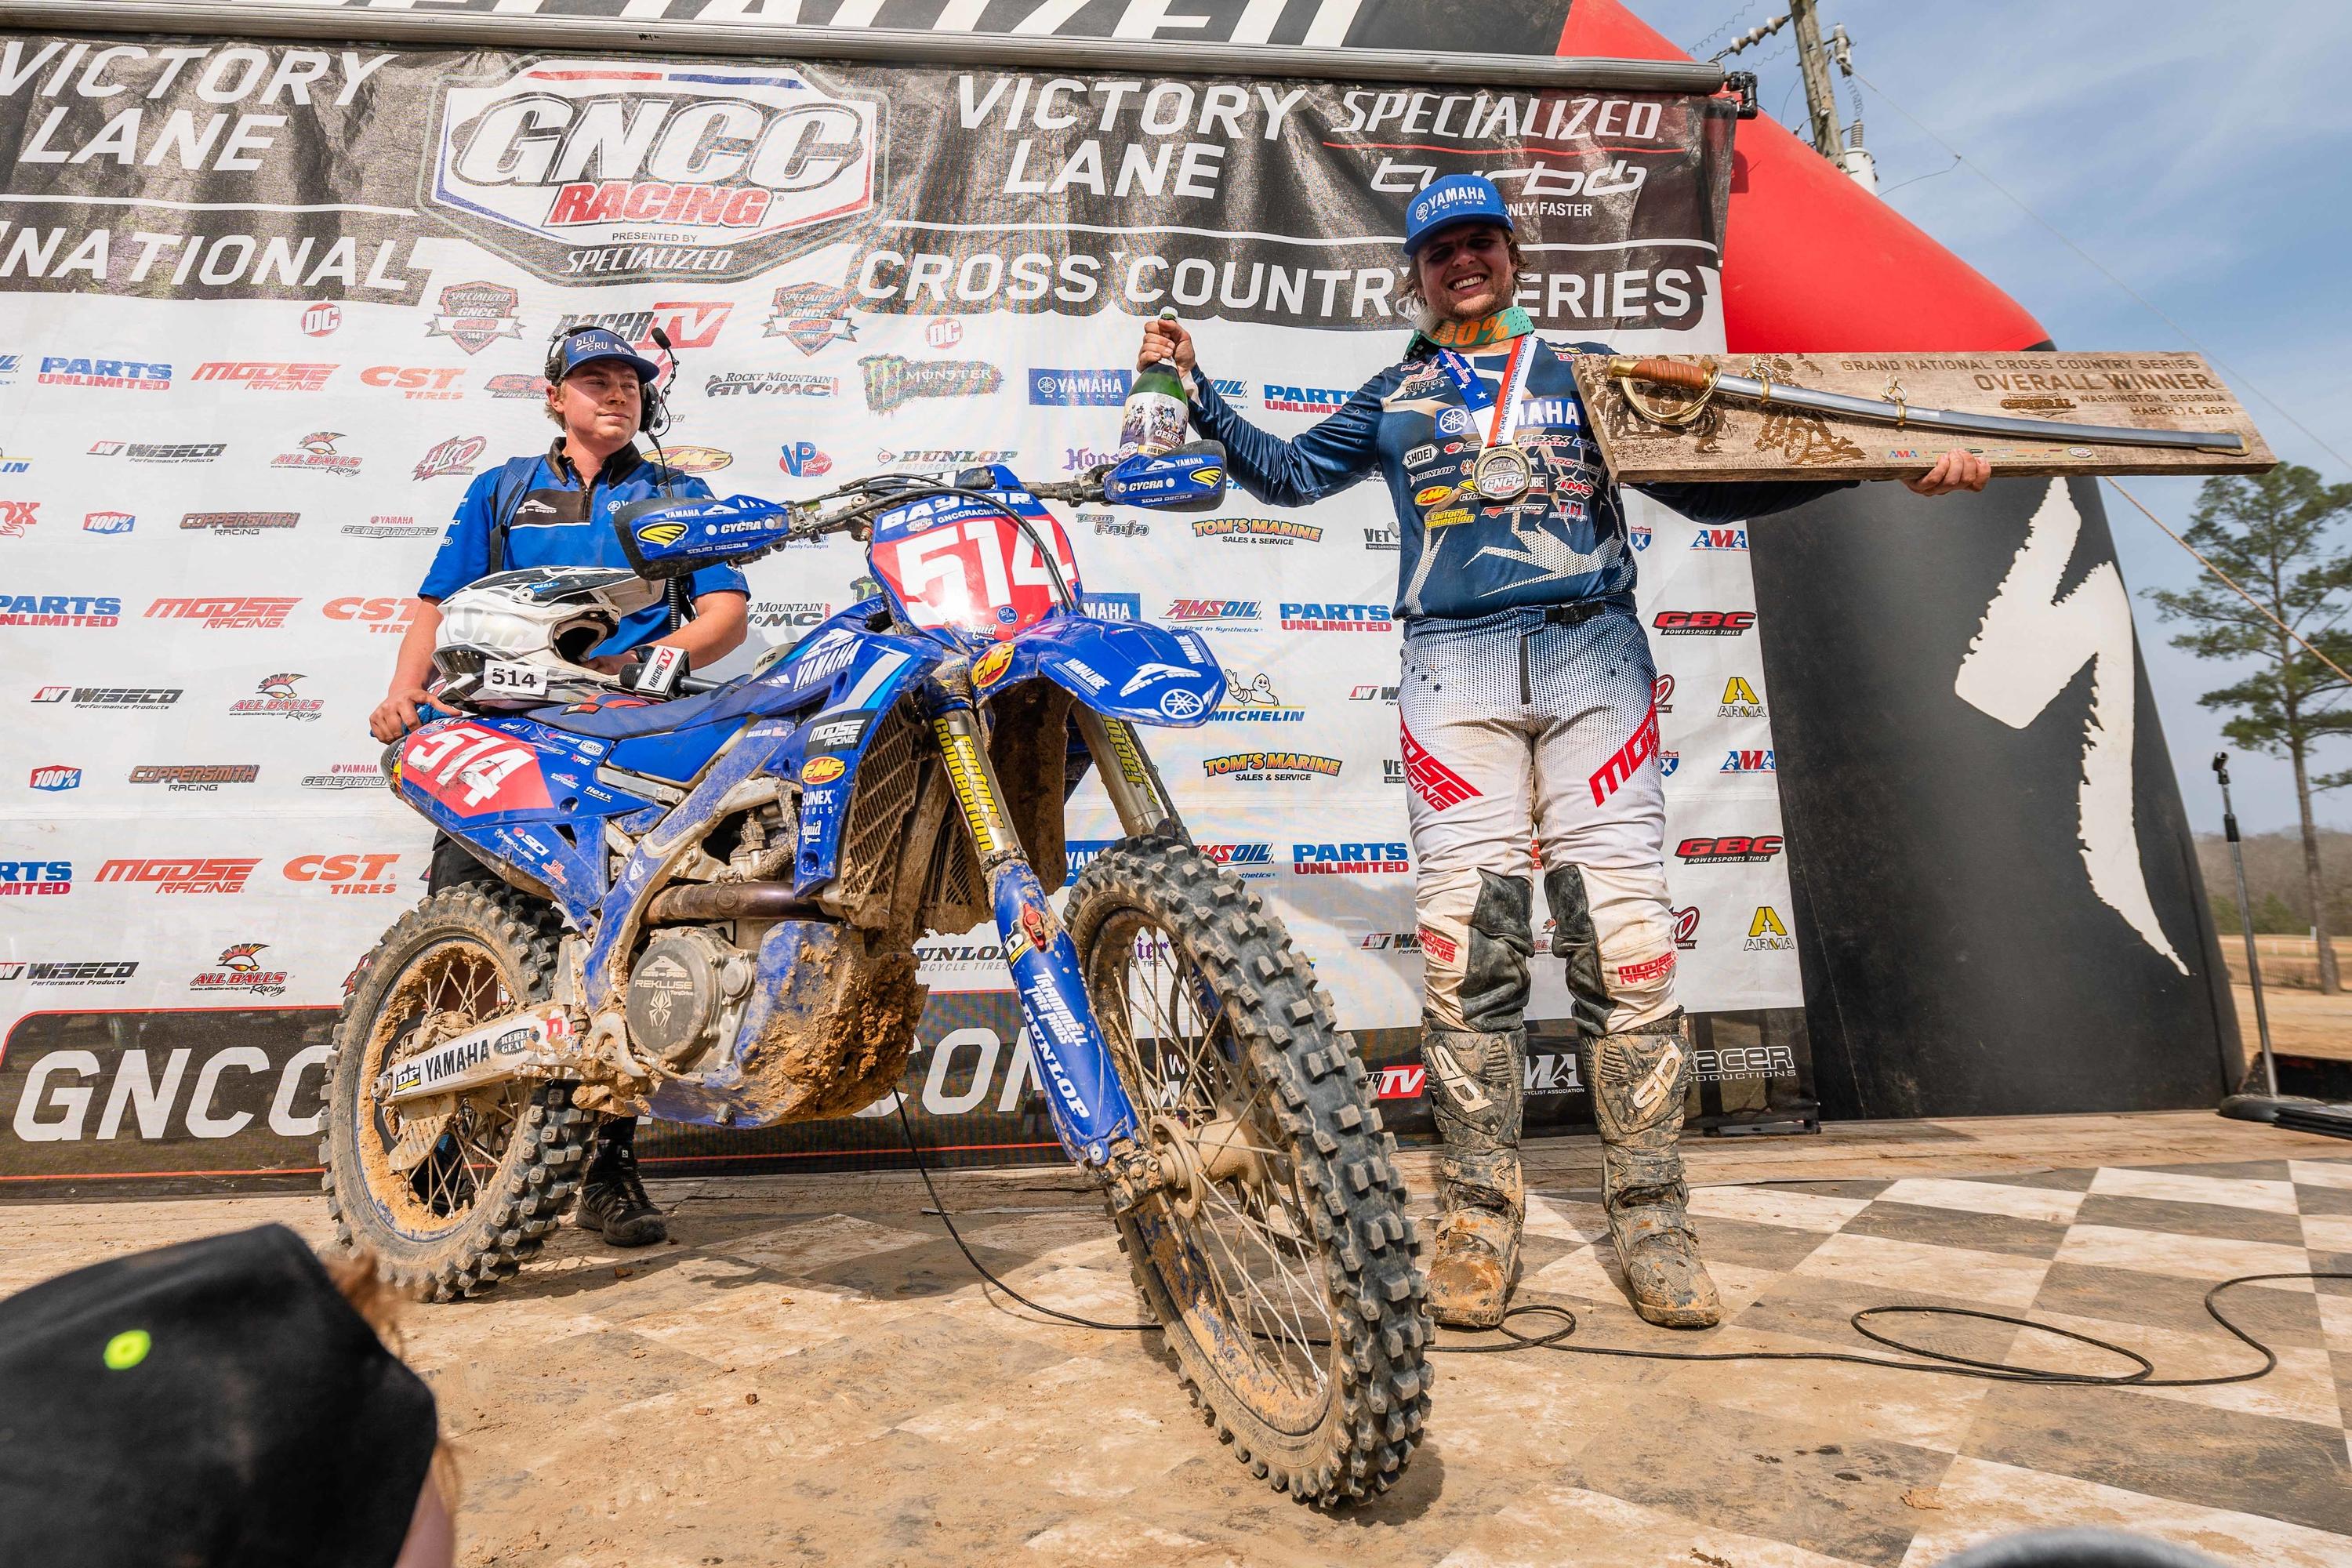 The Specialized General Motorcycle Race Report